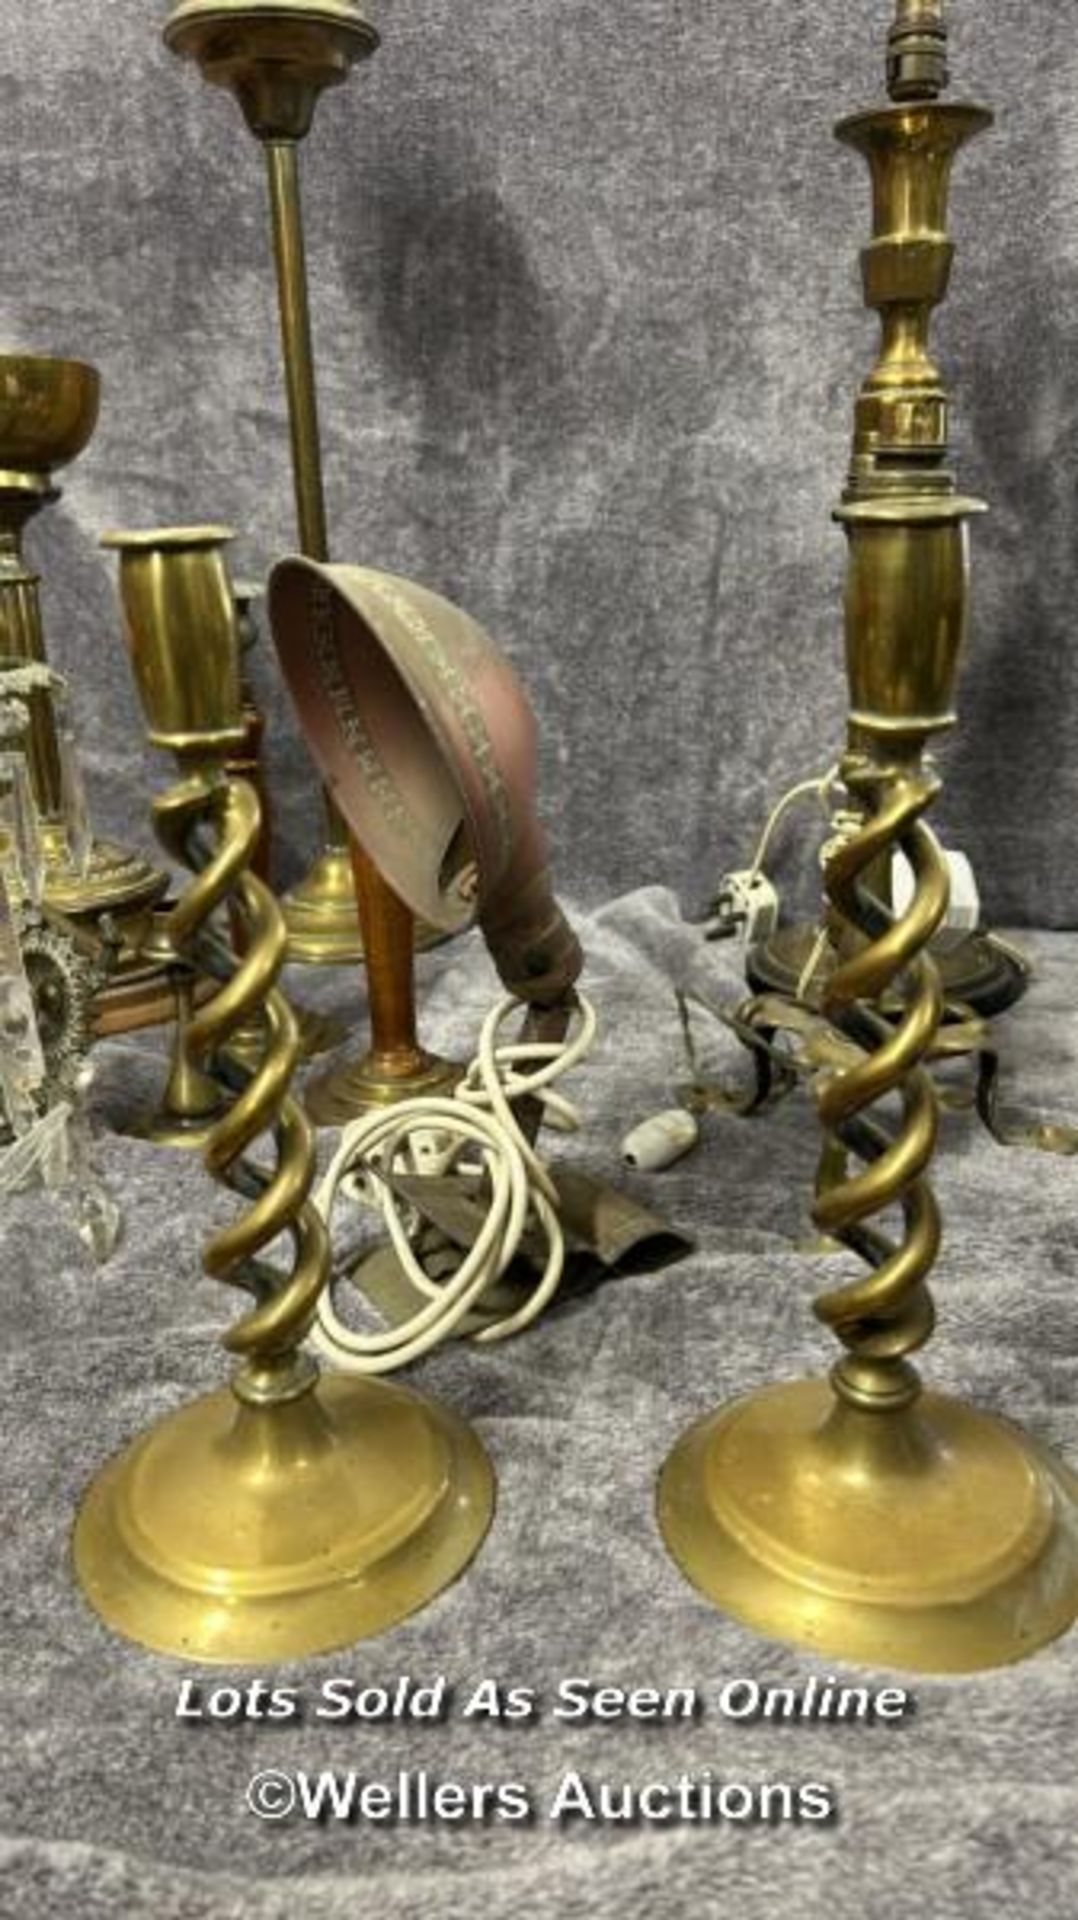 Collection of brass lamps and candle holders including a pair of twisted candle sticks, vintage desk - Image 2 of 10